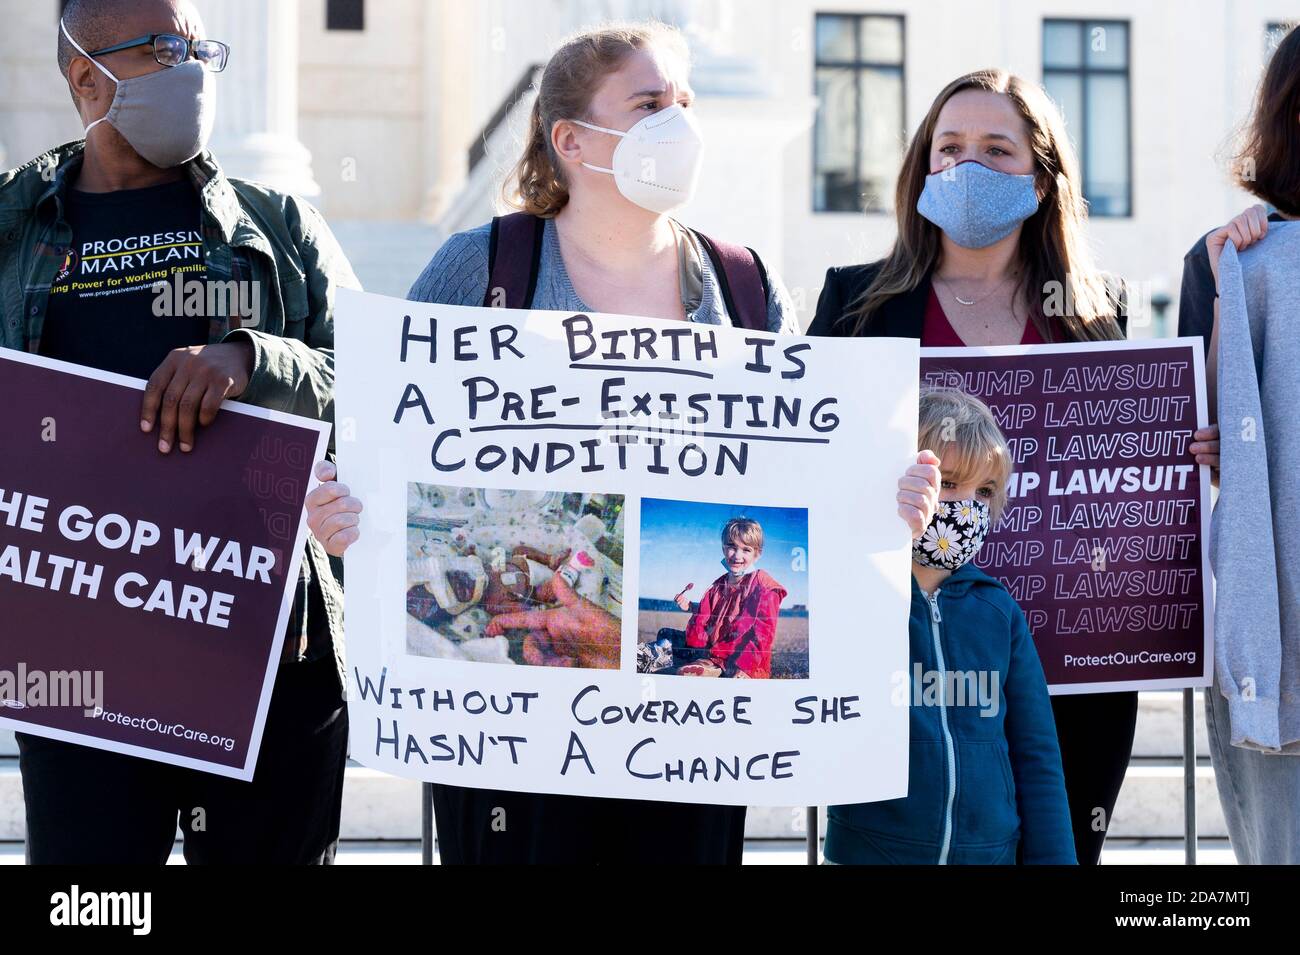 Washington, DC, USA. 10th Nov, 2020. November 10, 2020 - Washington, DC, United States: Woman with a sign saying ''Her birth is a pre-existing condition, without coverage she hasn't a chance'' at a demonstration in front of the Supreme Court in favor of the Affordable Care Act (ACA) on the day that the Supreme Court is hearing arguments in a case regarding it. Credit: Michael Brochstein/ZUMA Wire/Alamy Live News Stock Photo